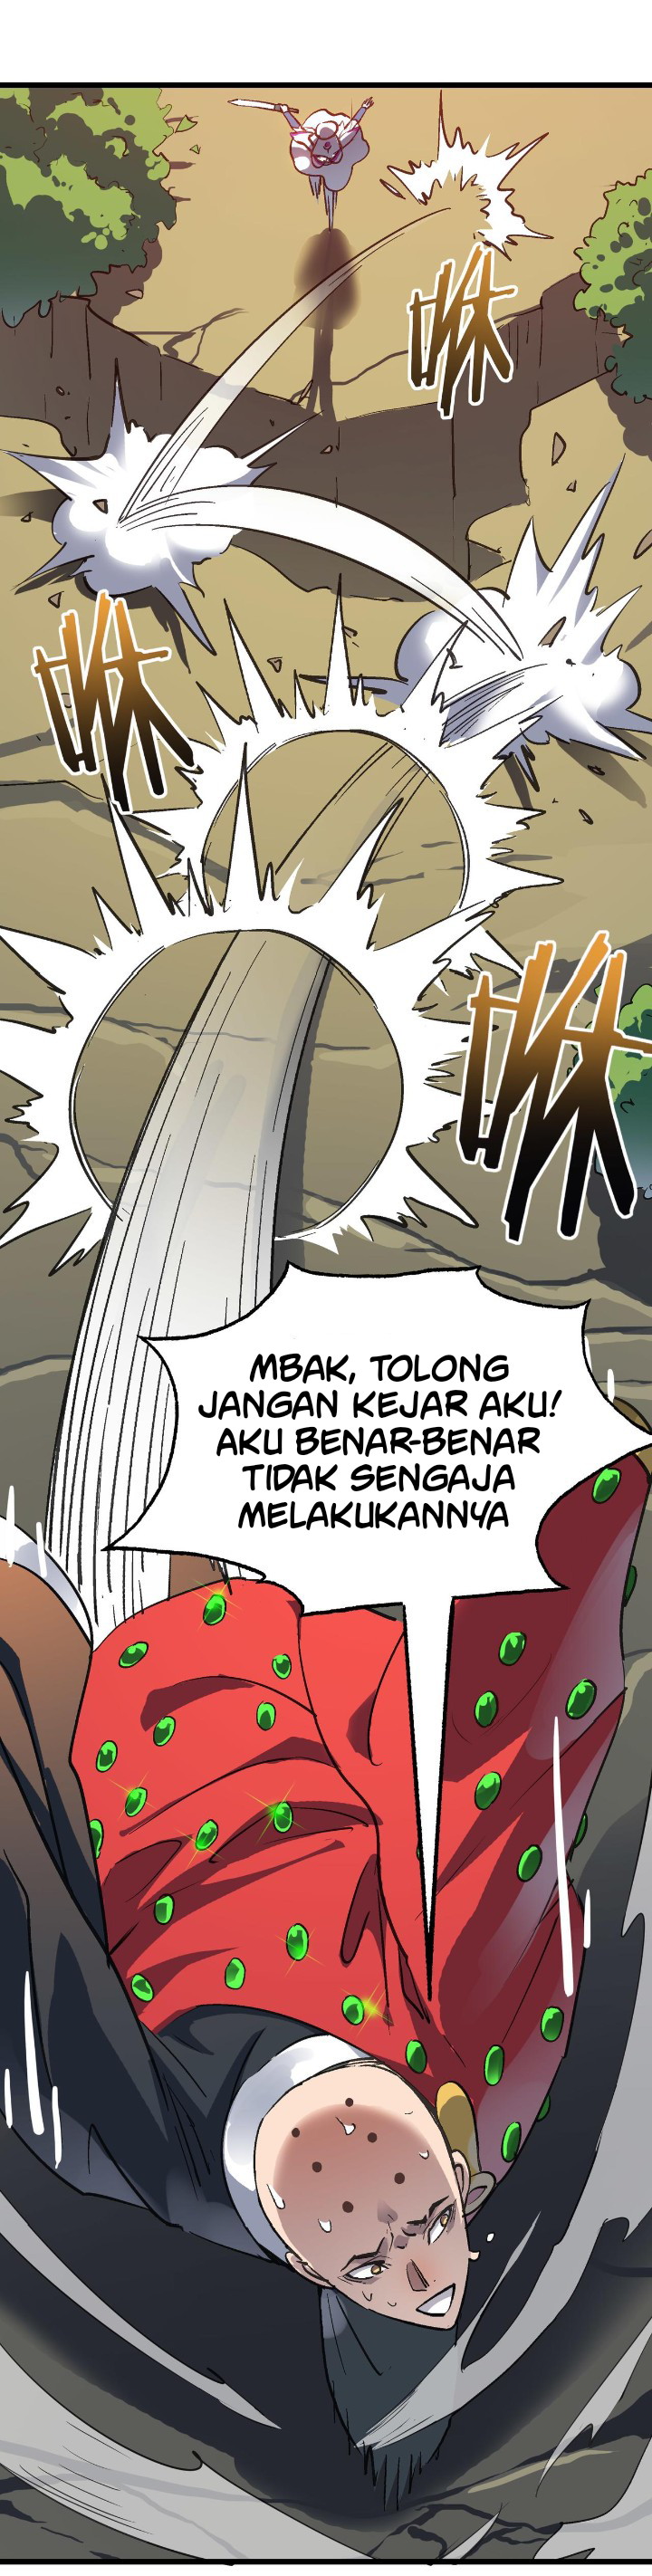 Dilarang COPAS - situs resmi www.mangacanblog.com - Komik building the strongest shaolin temple in another world 046 - chapter 46 47 Indonesia building the strongest shaolin temple in another world 046 - chapter 46 Terbaru 13|Baca Manga Komik Indonesia|Mangacan